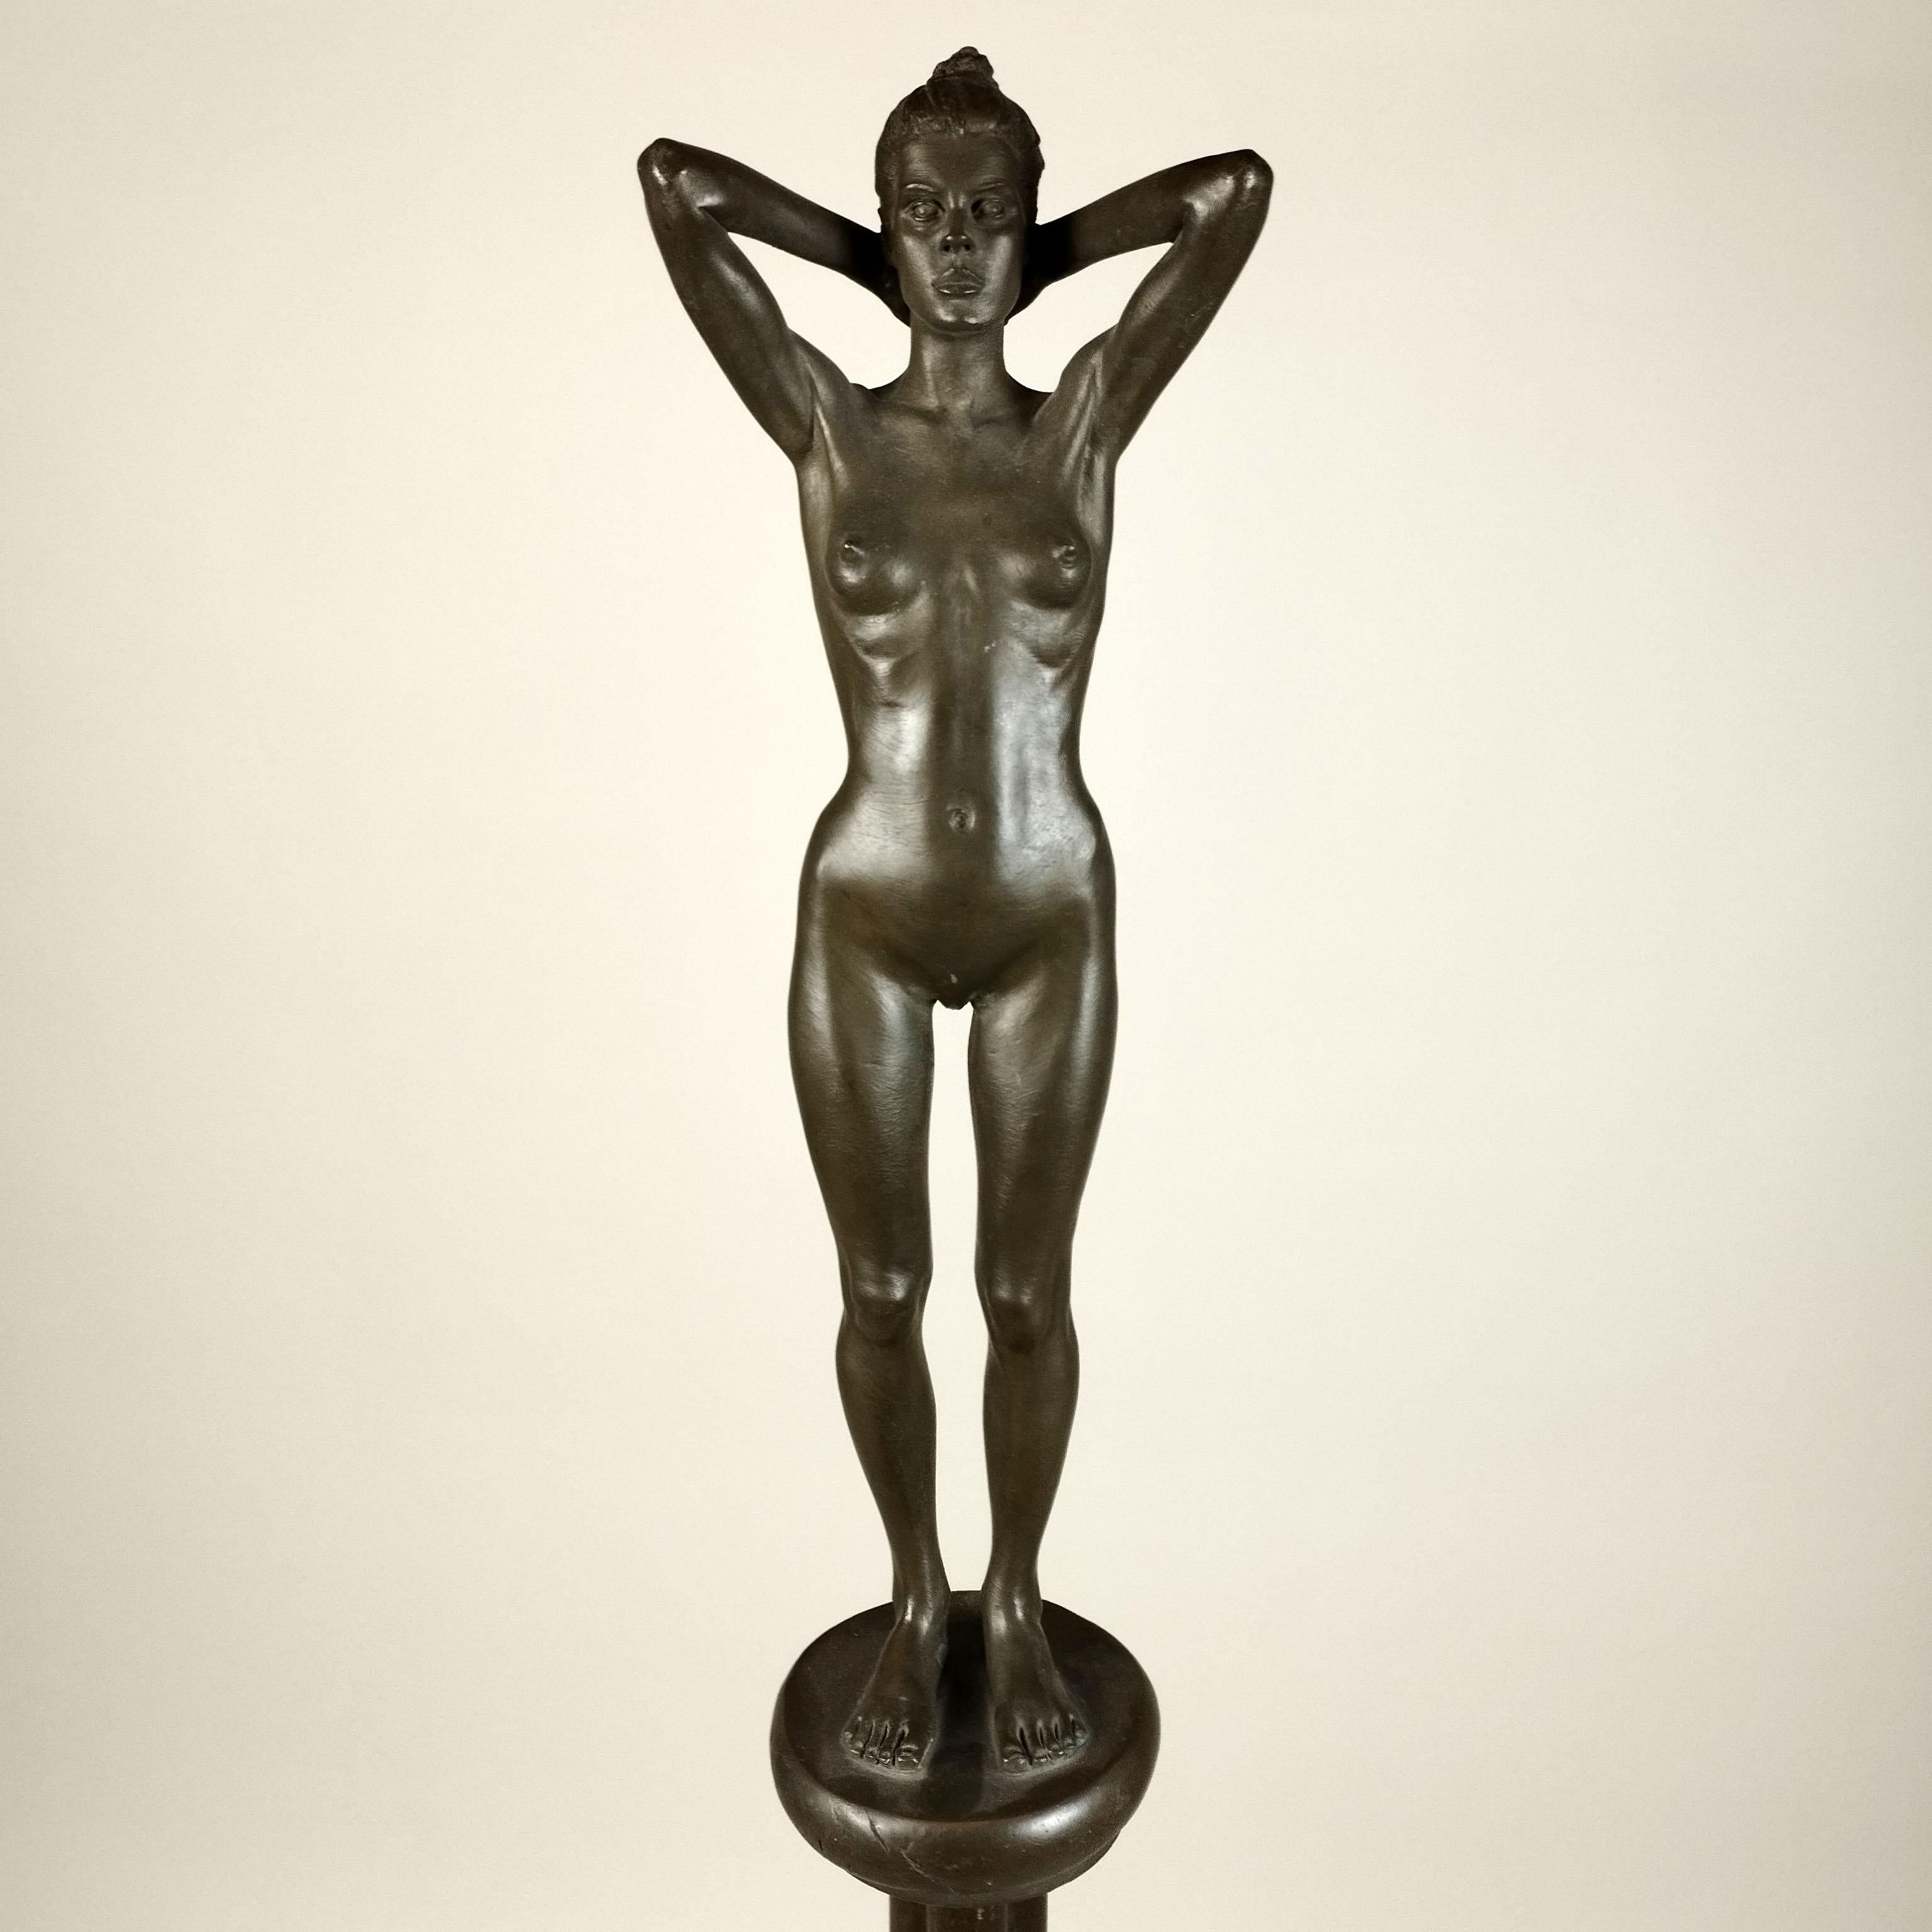 A bronze sculpture with tripod base by Robert Graham, Mexican - American sculptor who lived in Los Angeles. The sculpture depicts a standing female figure with her arms behind her head. Unsigned. Featured on the Robert Graham exhibition book